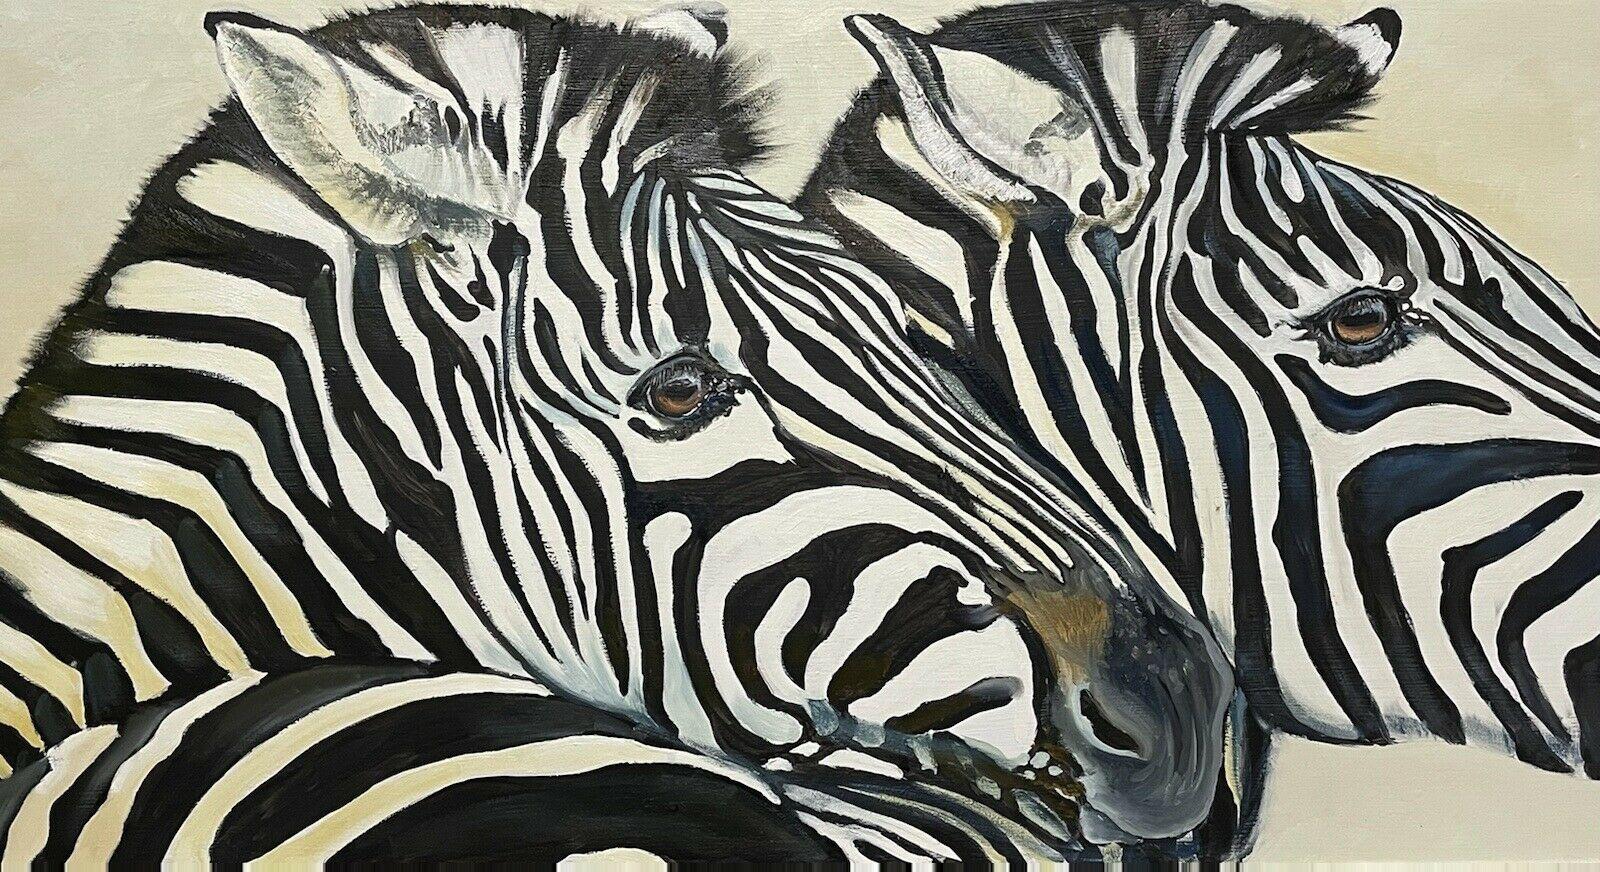 Clive Fredriksson Animal Painting - HUGE OIL PAINTING OF TWO ZEBRAS - BY CLIVE FREDRIKSSON - FRAMED & STUNNING